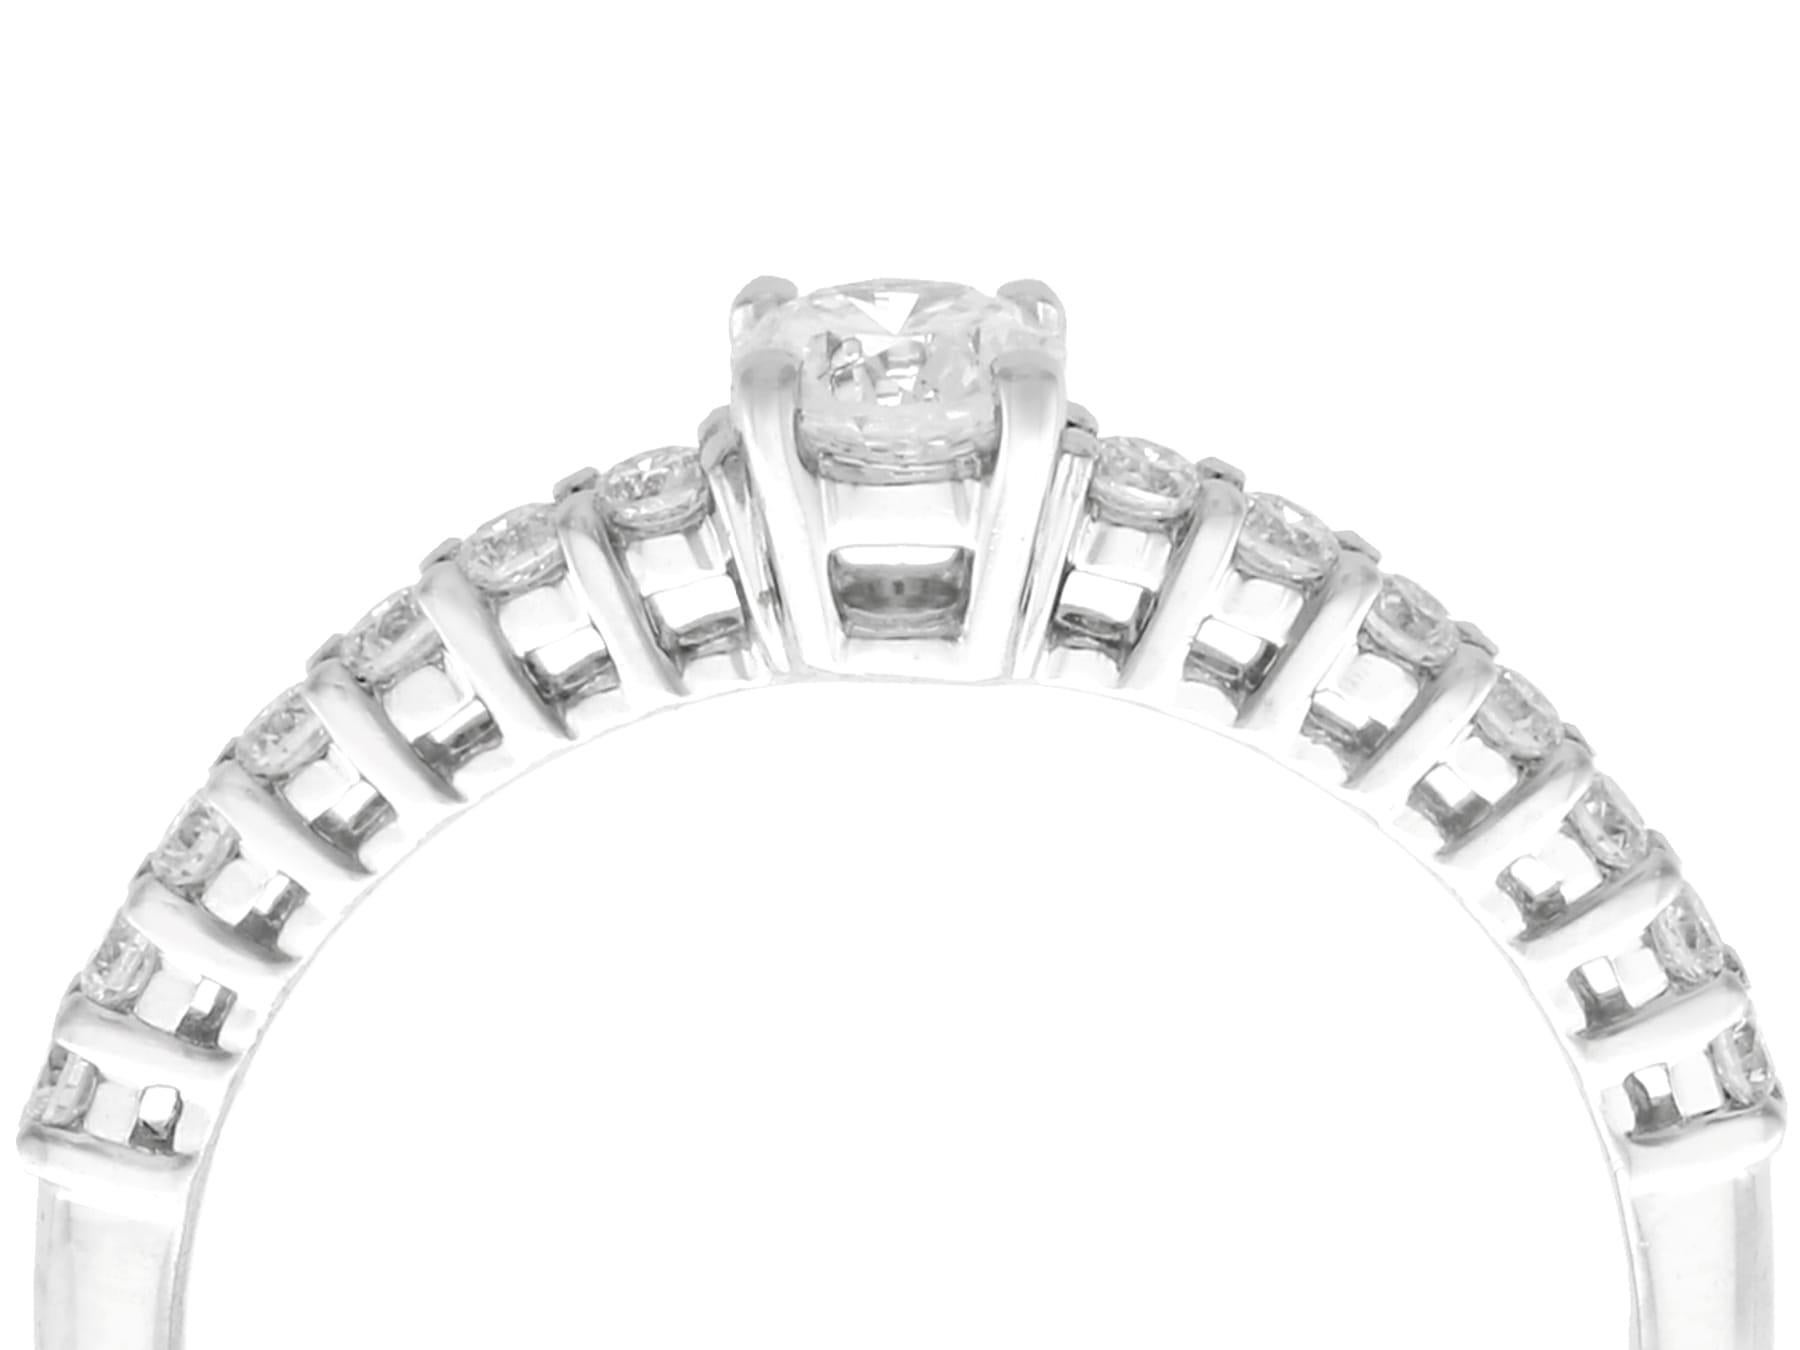 An impressive contemporary 0.46 carat diamond and 18k white gold dress ring; part of our diverse antique jewelry and estate jewelry collections.

This fine and impressive diamond band ring with diamond shoulders has been crafted in 18k white